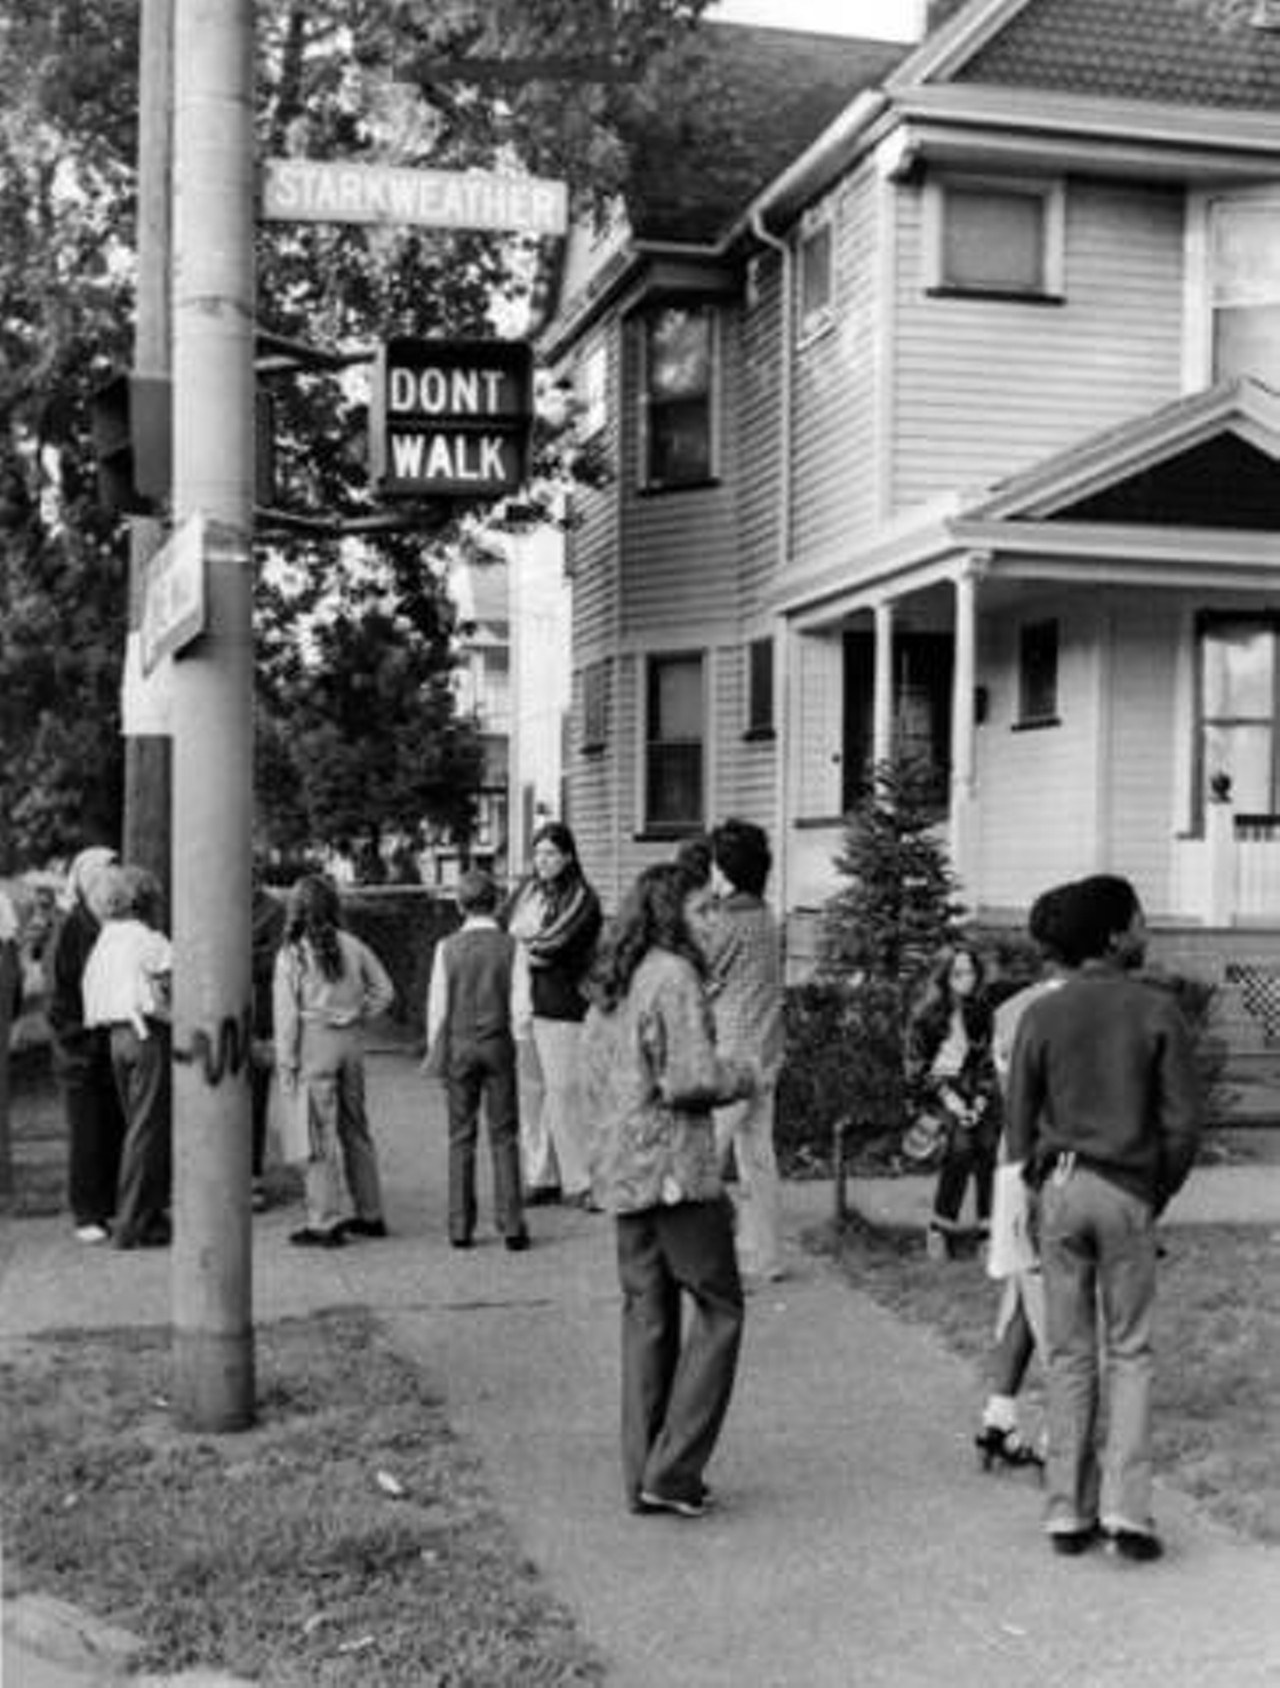 Students wait for buses on Starkweather Ave., Cleveland, Ohio in 1979